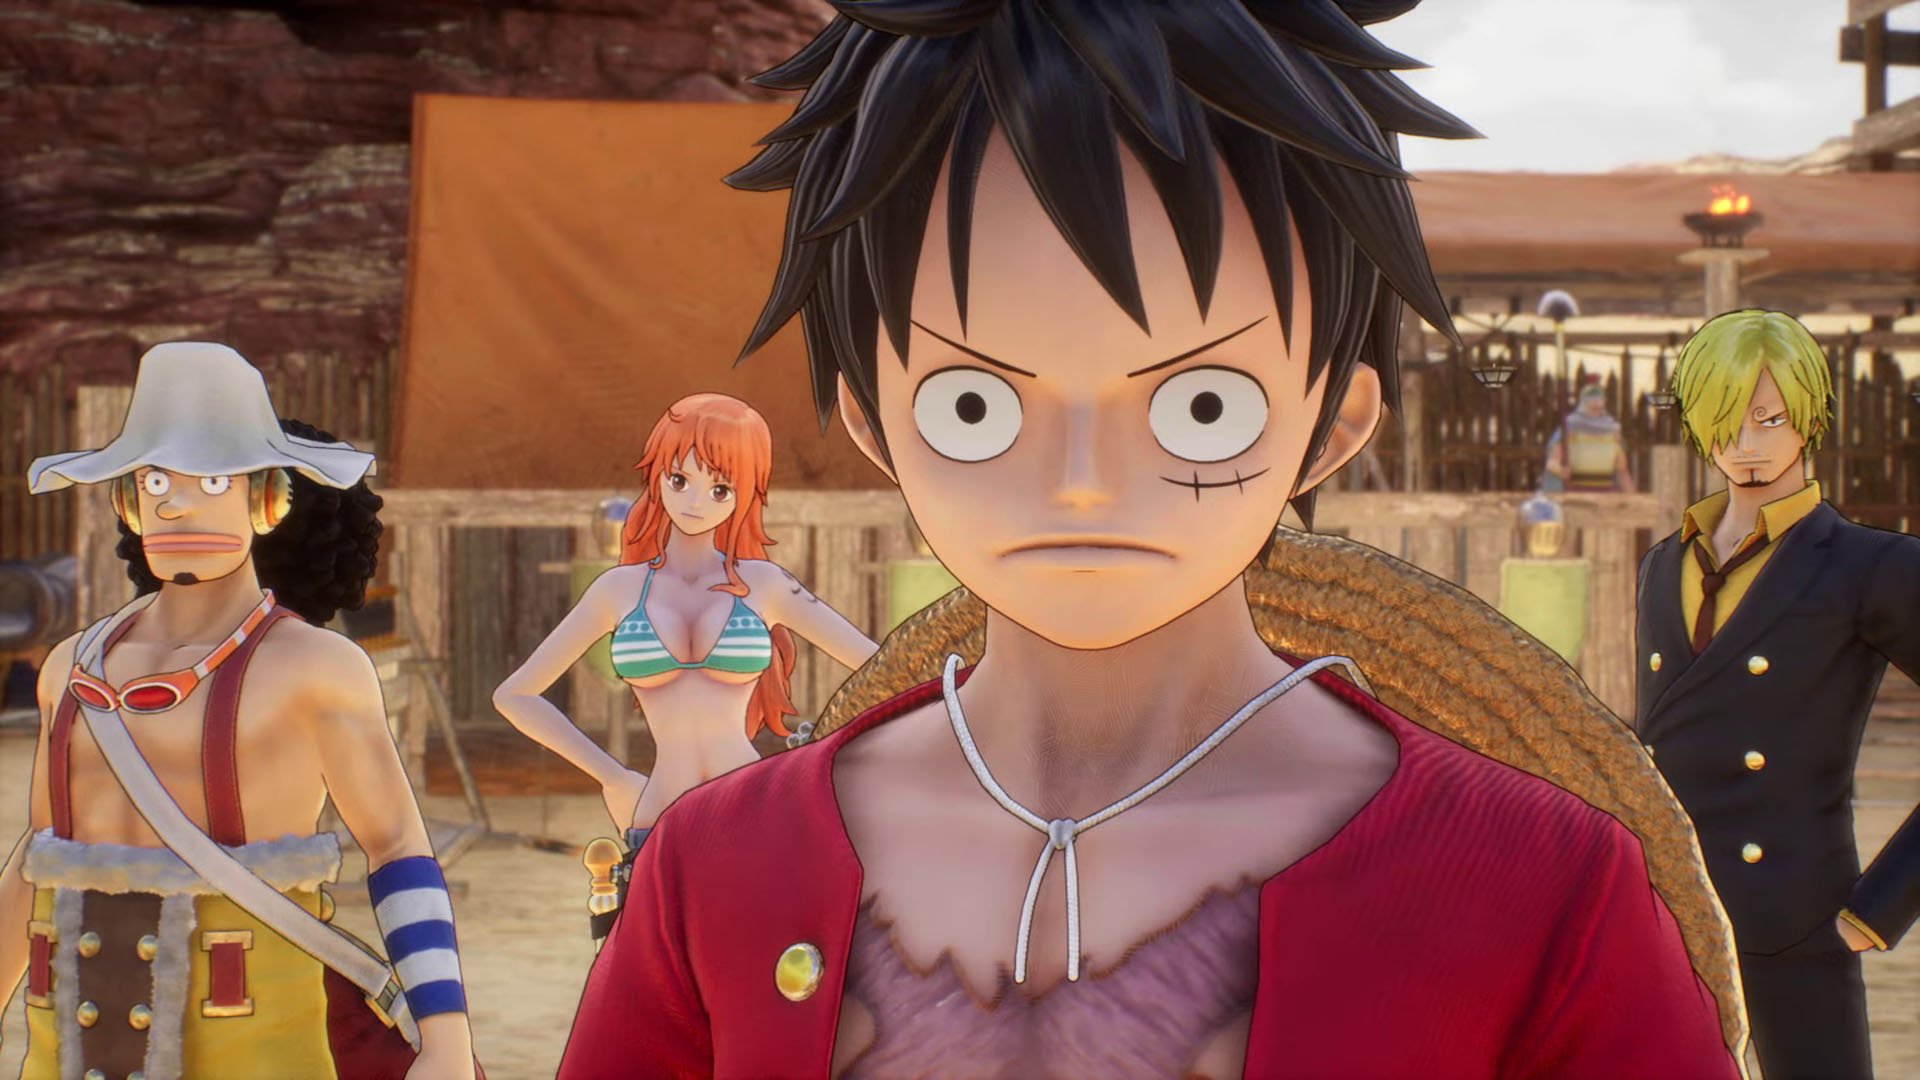 One Piece Odyssey: Upcoming JRPG Shows Turn-Based Combat and 2 New  Characters - IGN